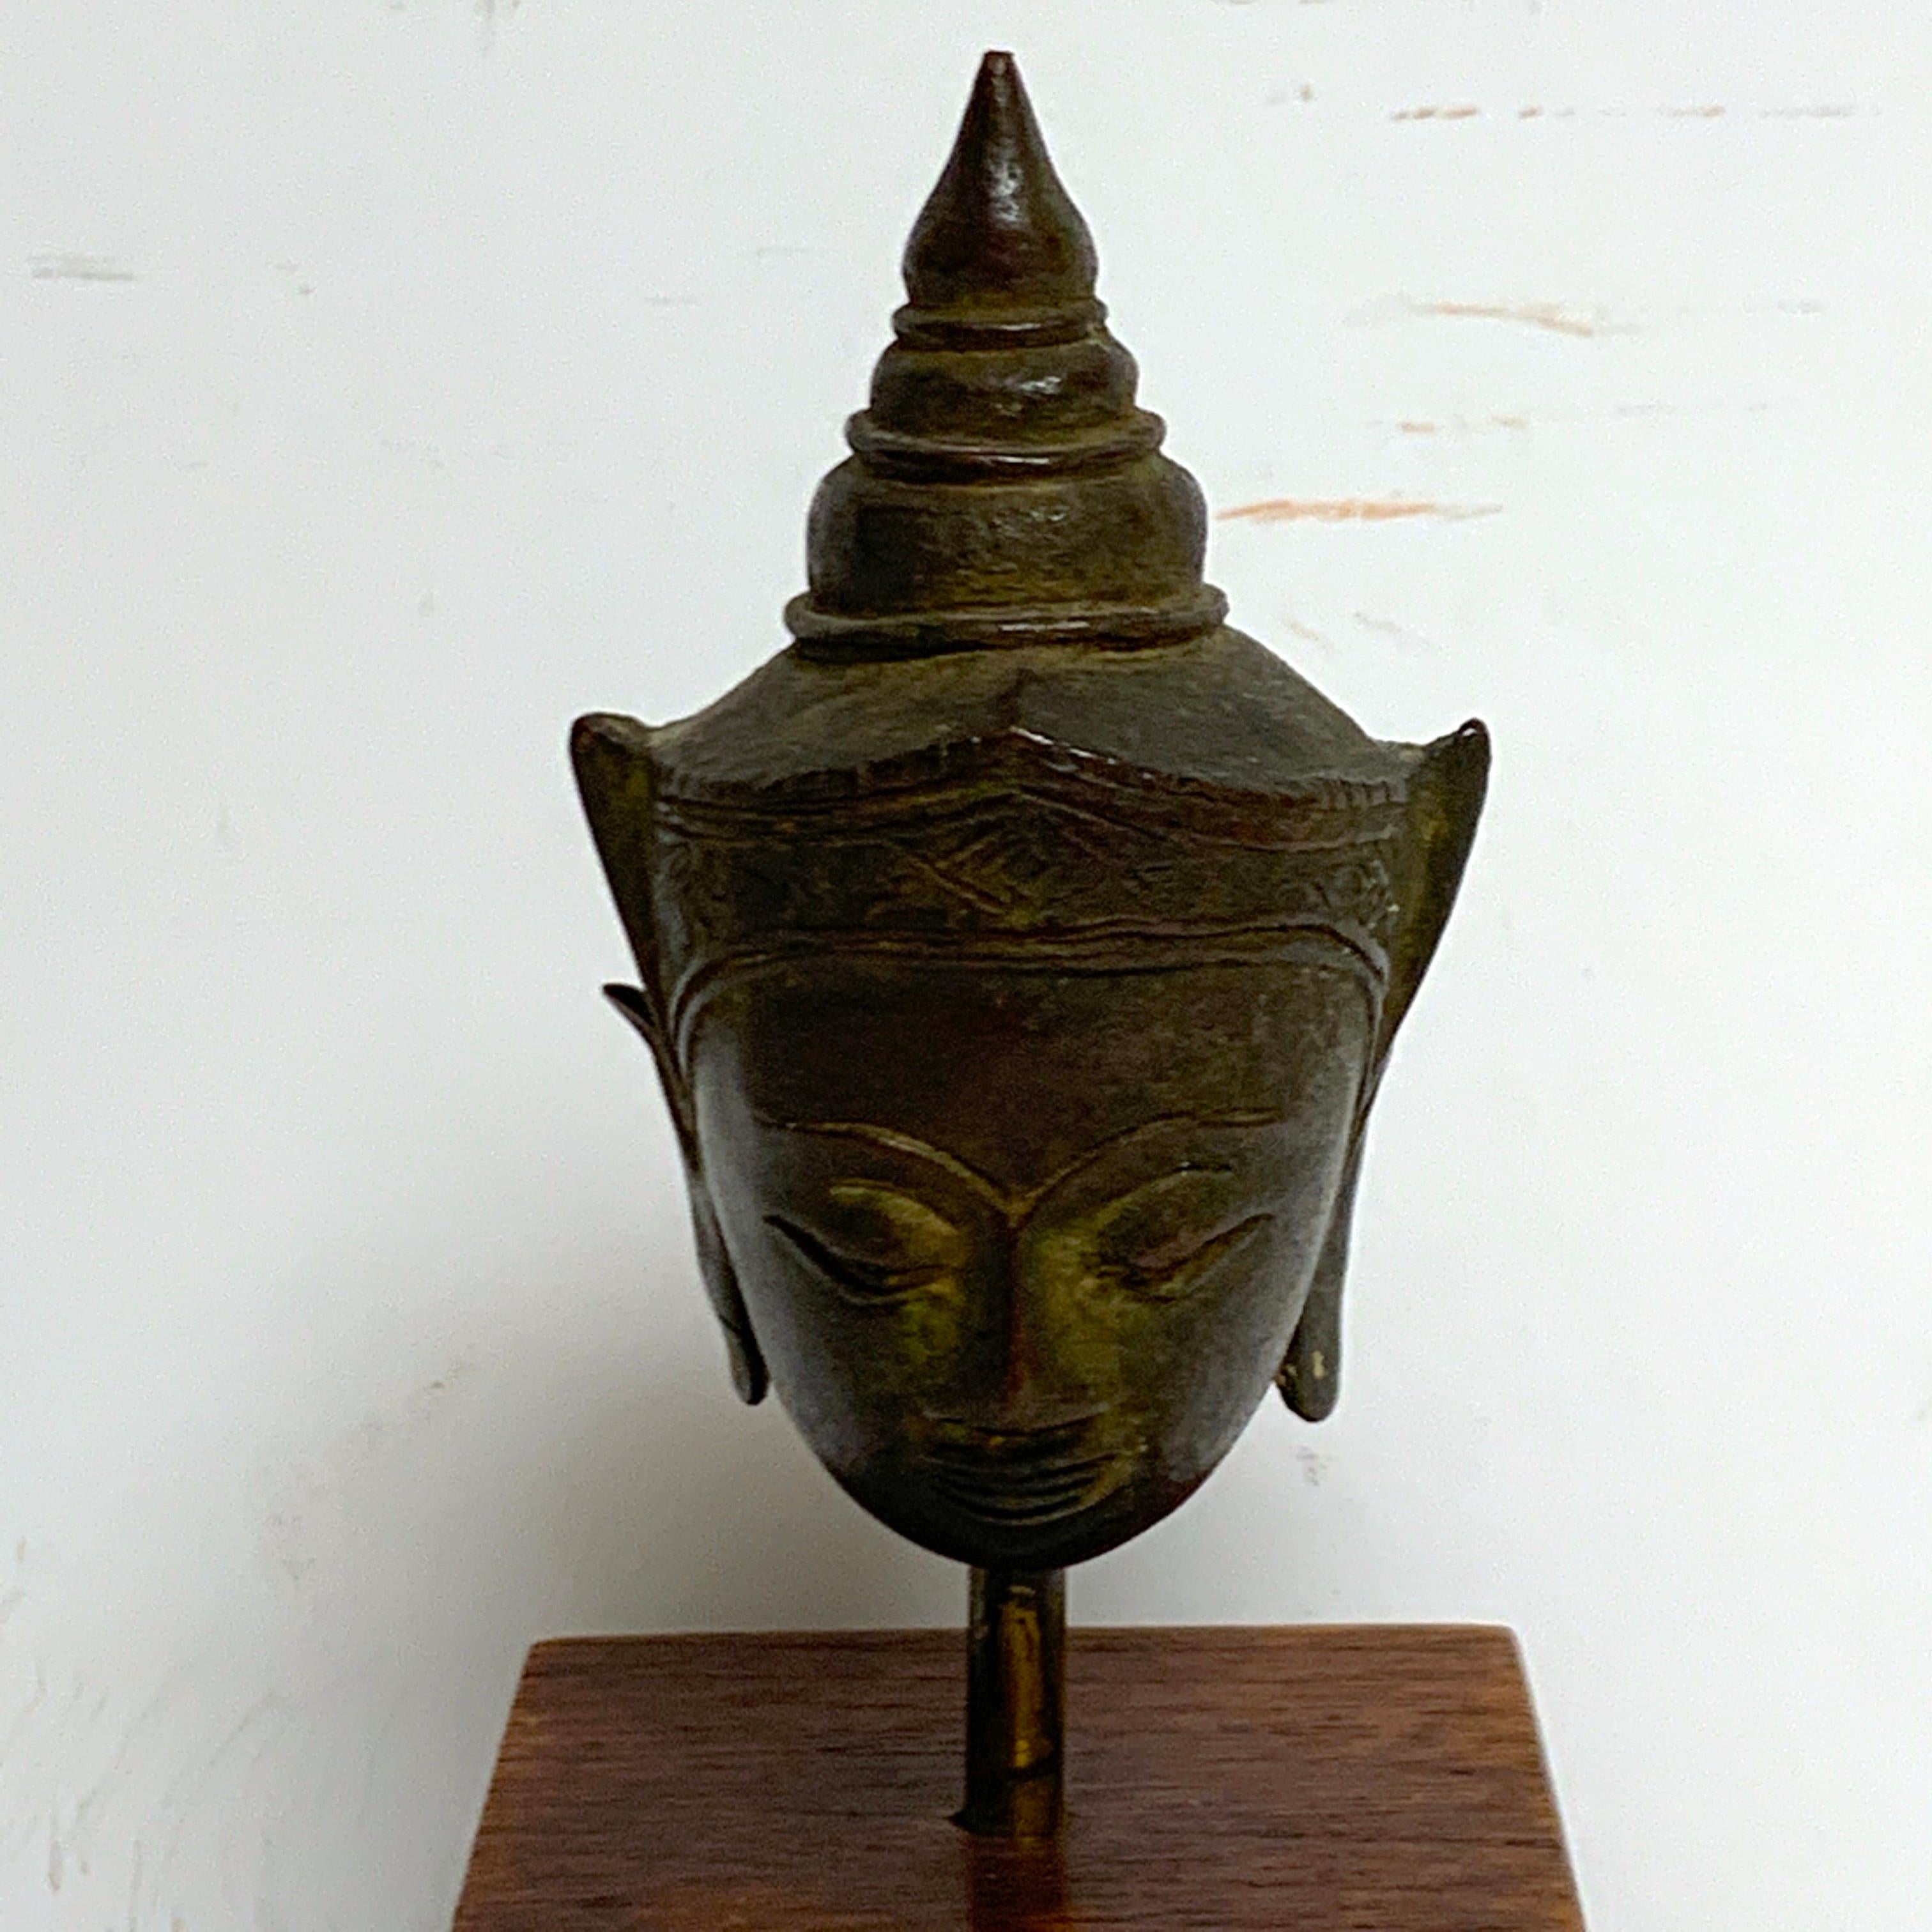 Miniature Bronze Thai Buddha Head, Museum mounted on a stepped wood pedestal. 20th century or older.
The sculpture alone measures 3